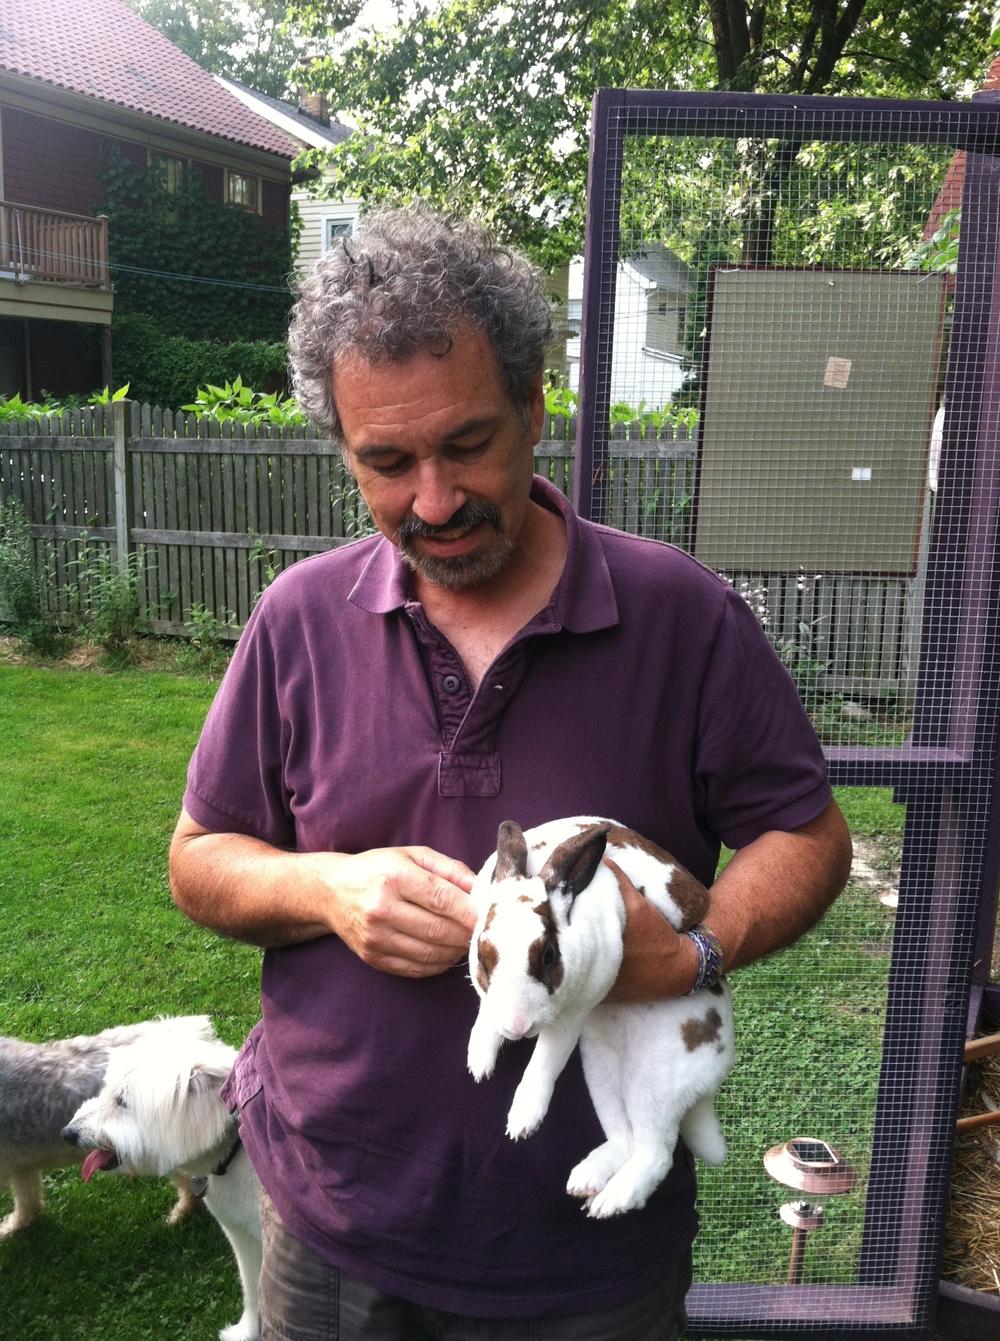 Ken holds his rescue rabbit, Owen, in his backyard. Two of his rescue dogs are behind him.